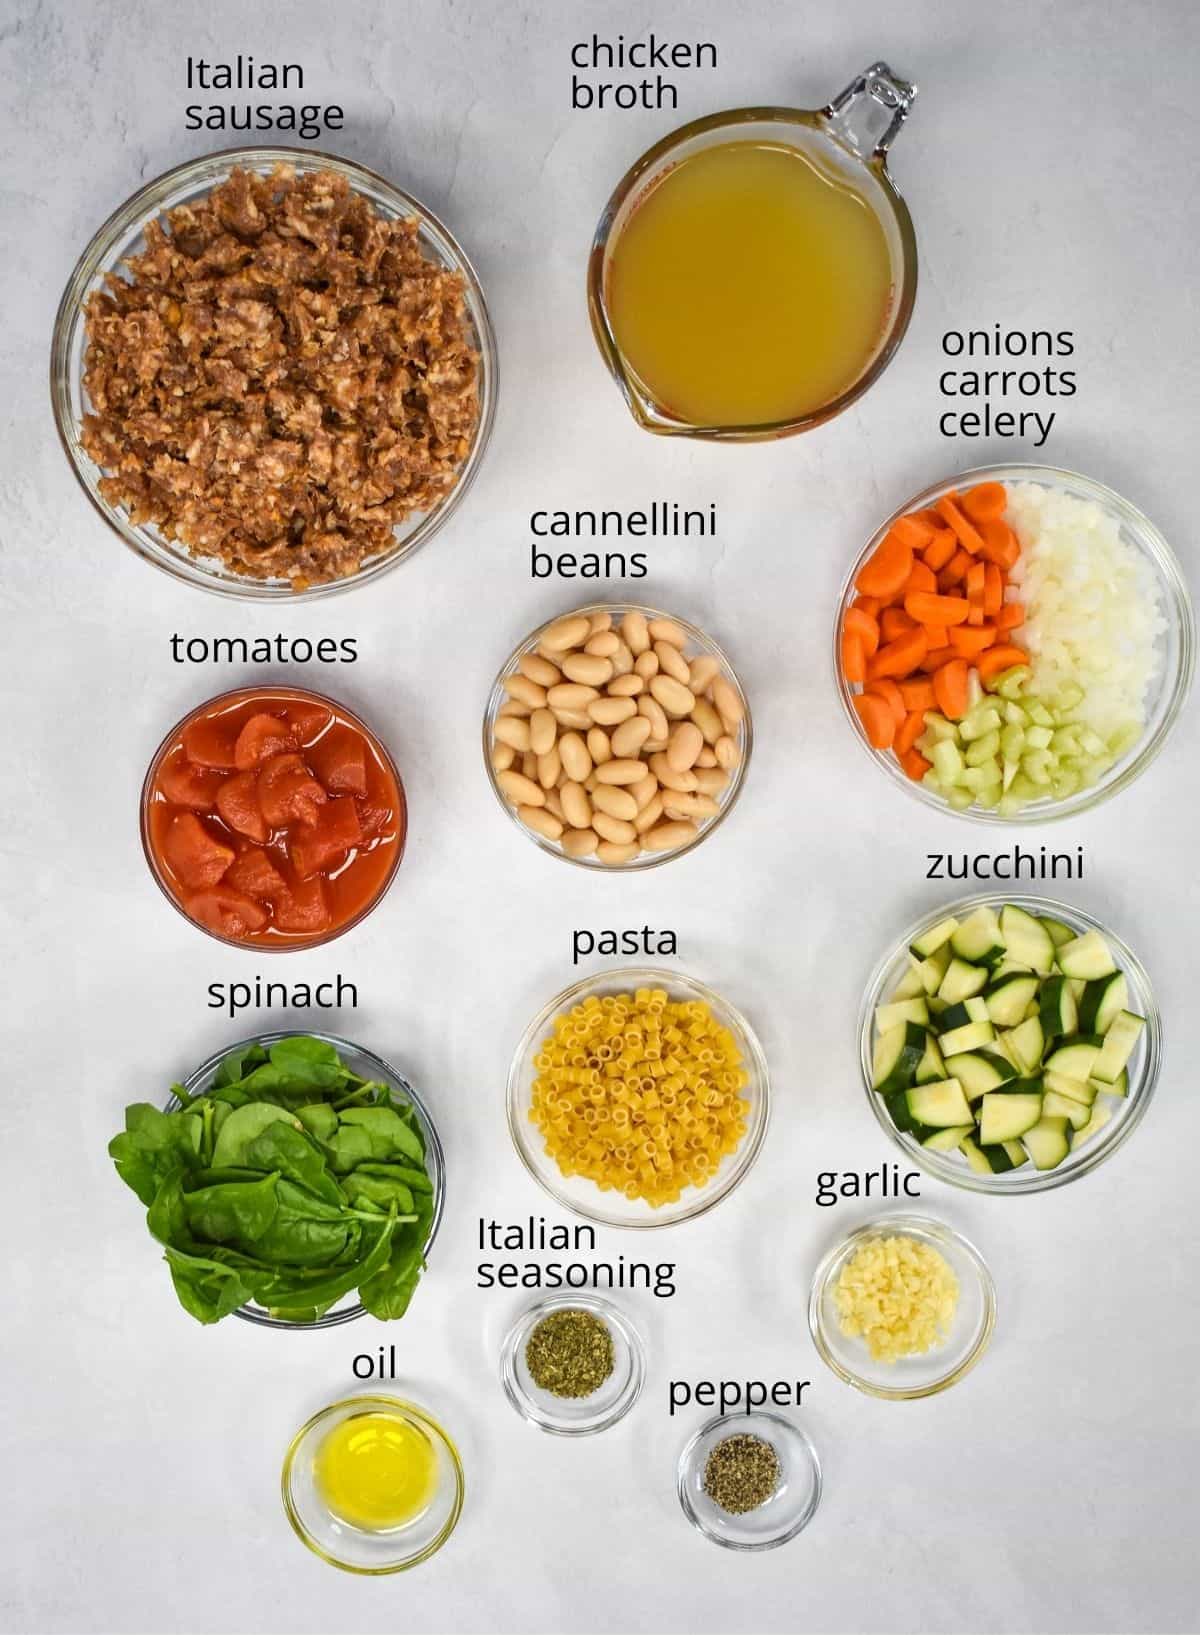 The ingredients for the soup prepped and arranged in glass bowls on a white table. Each ingredient has a small label with the name in black letters.